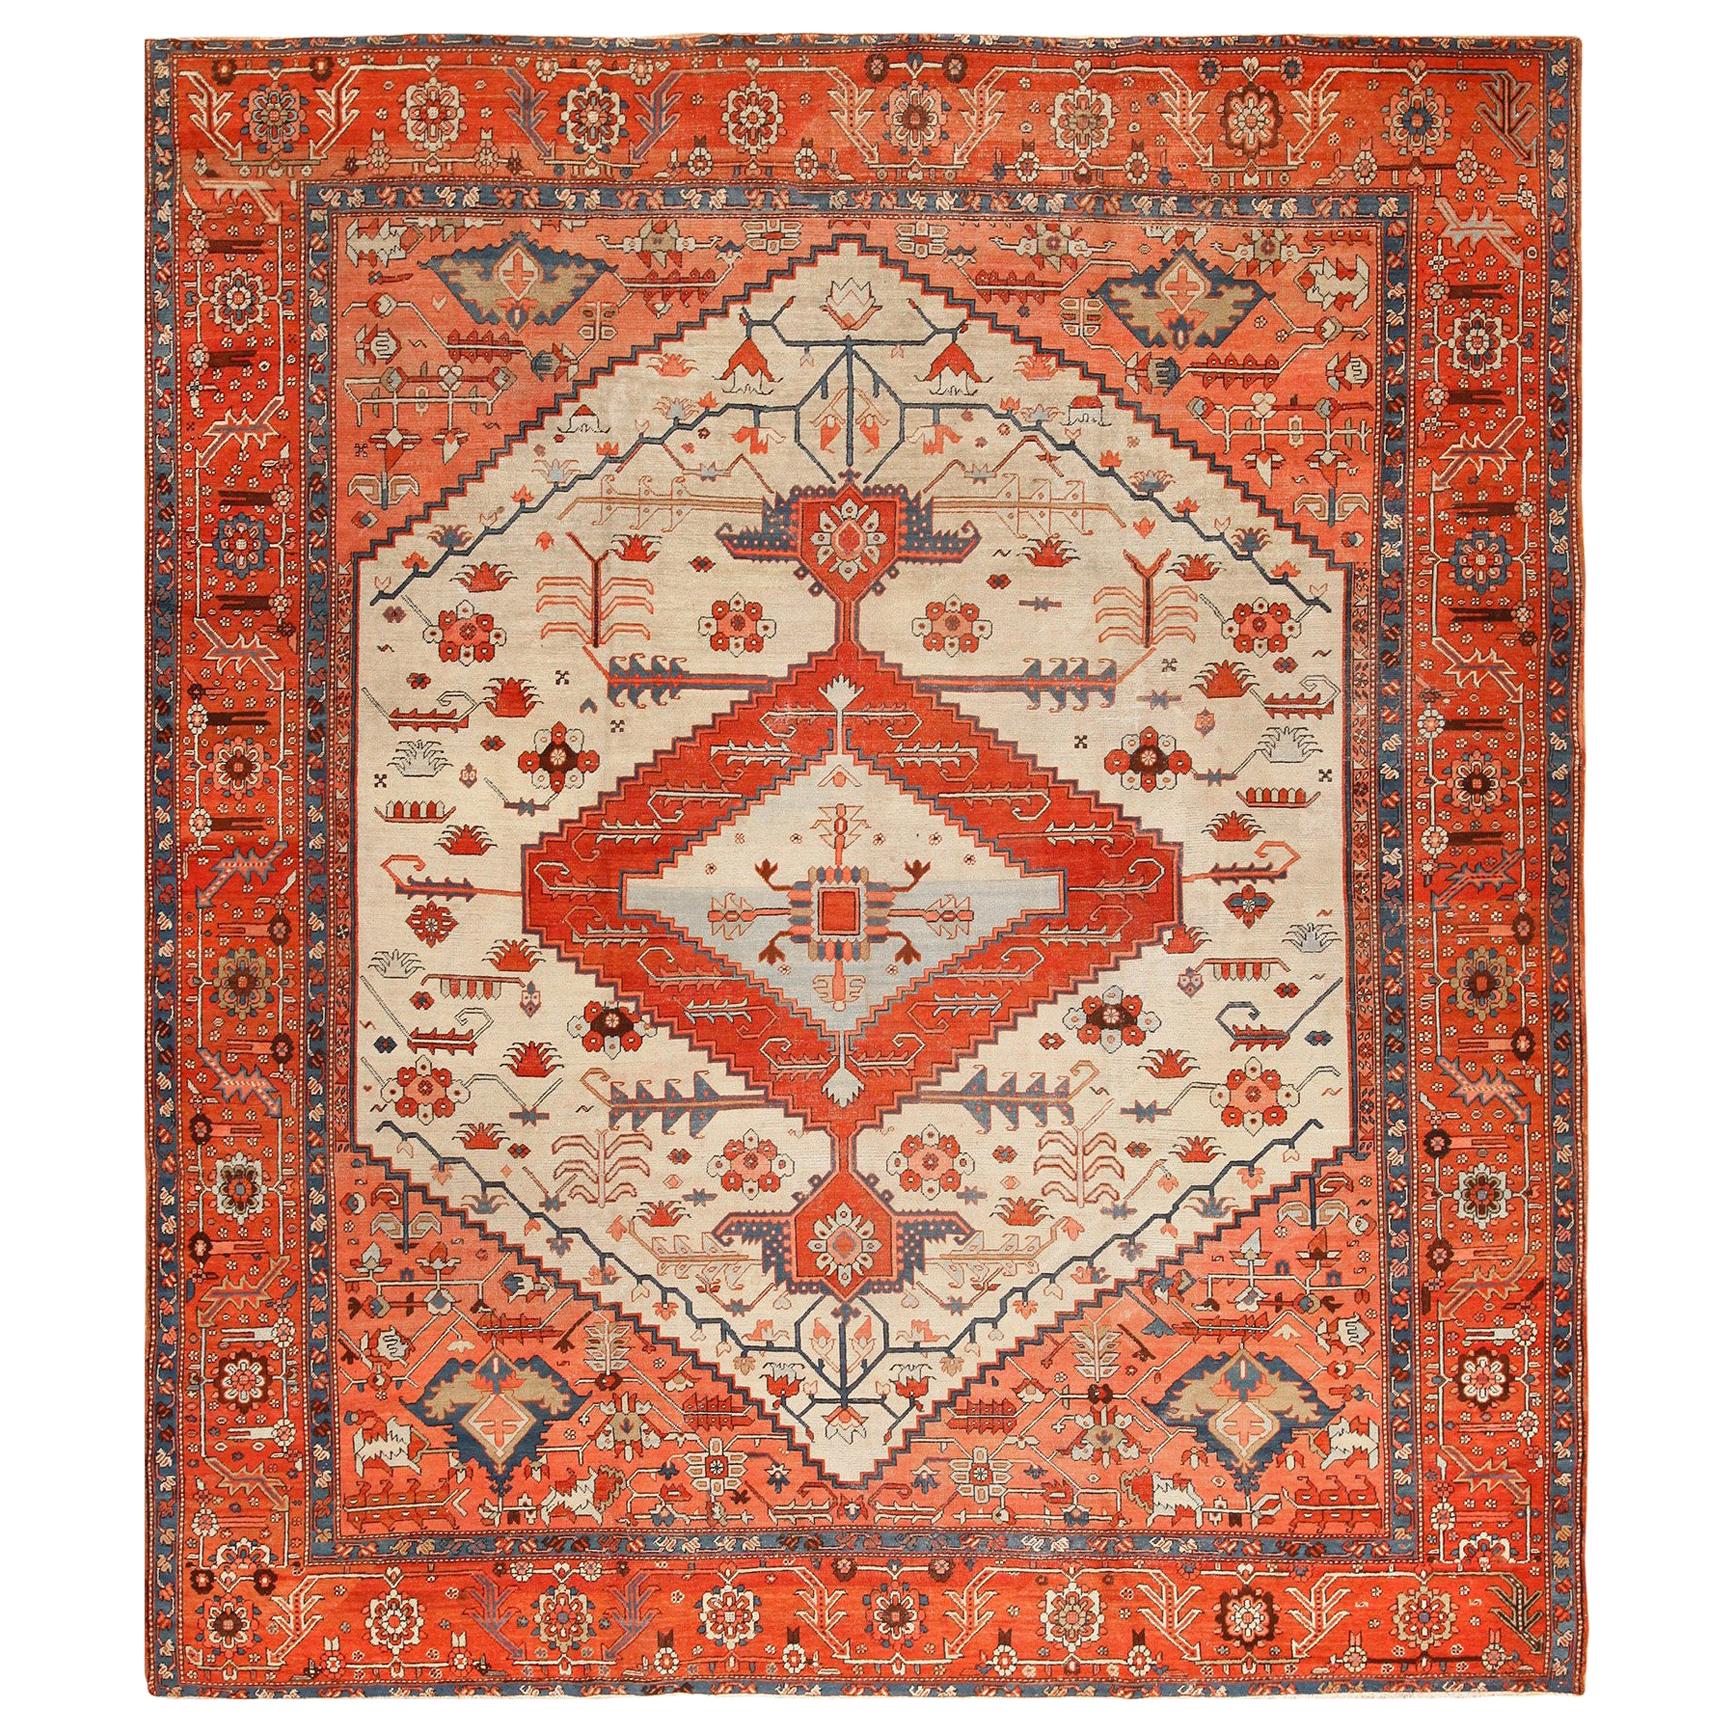 Nazmiyal Collection Antique Serapi Persian Rug. Size: 11 ft x 12 ft 6 in